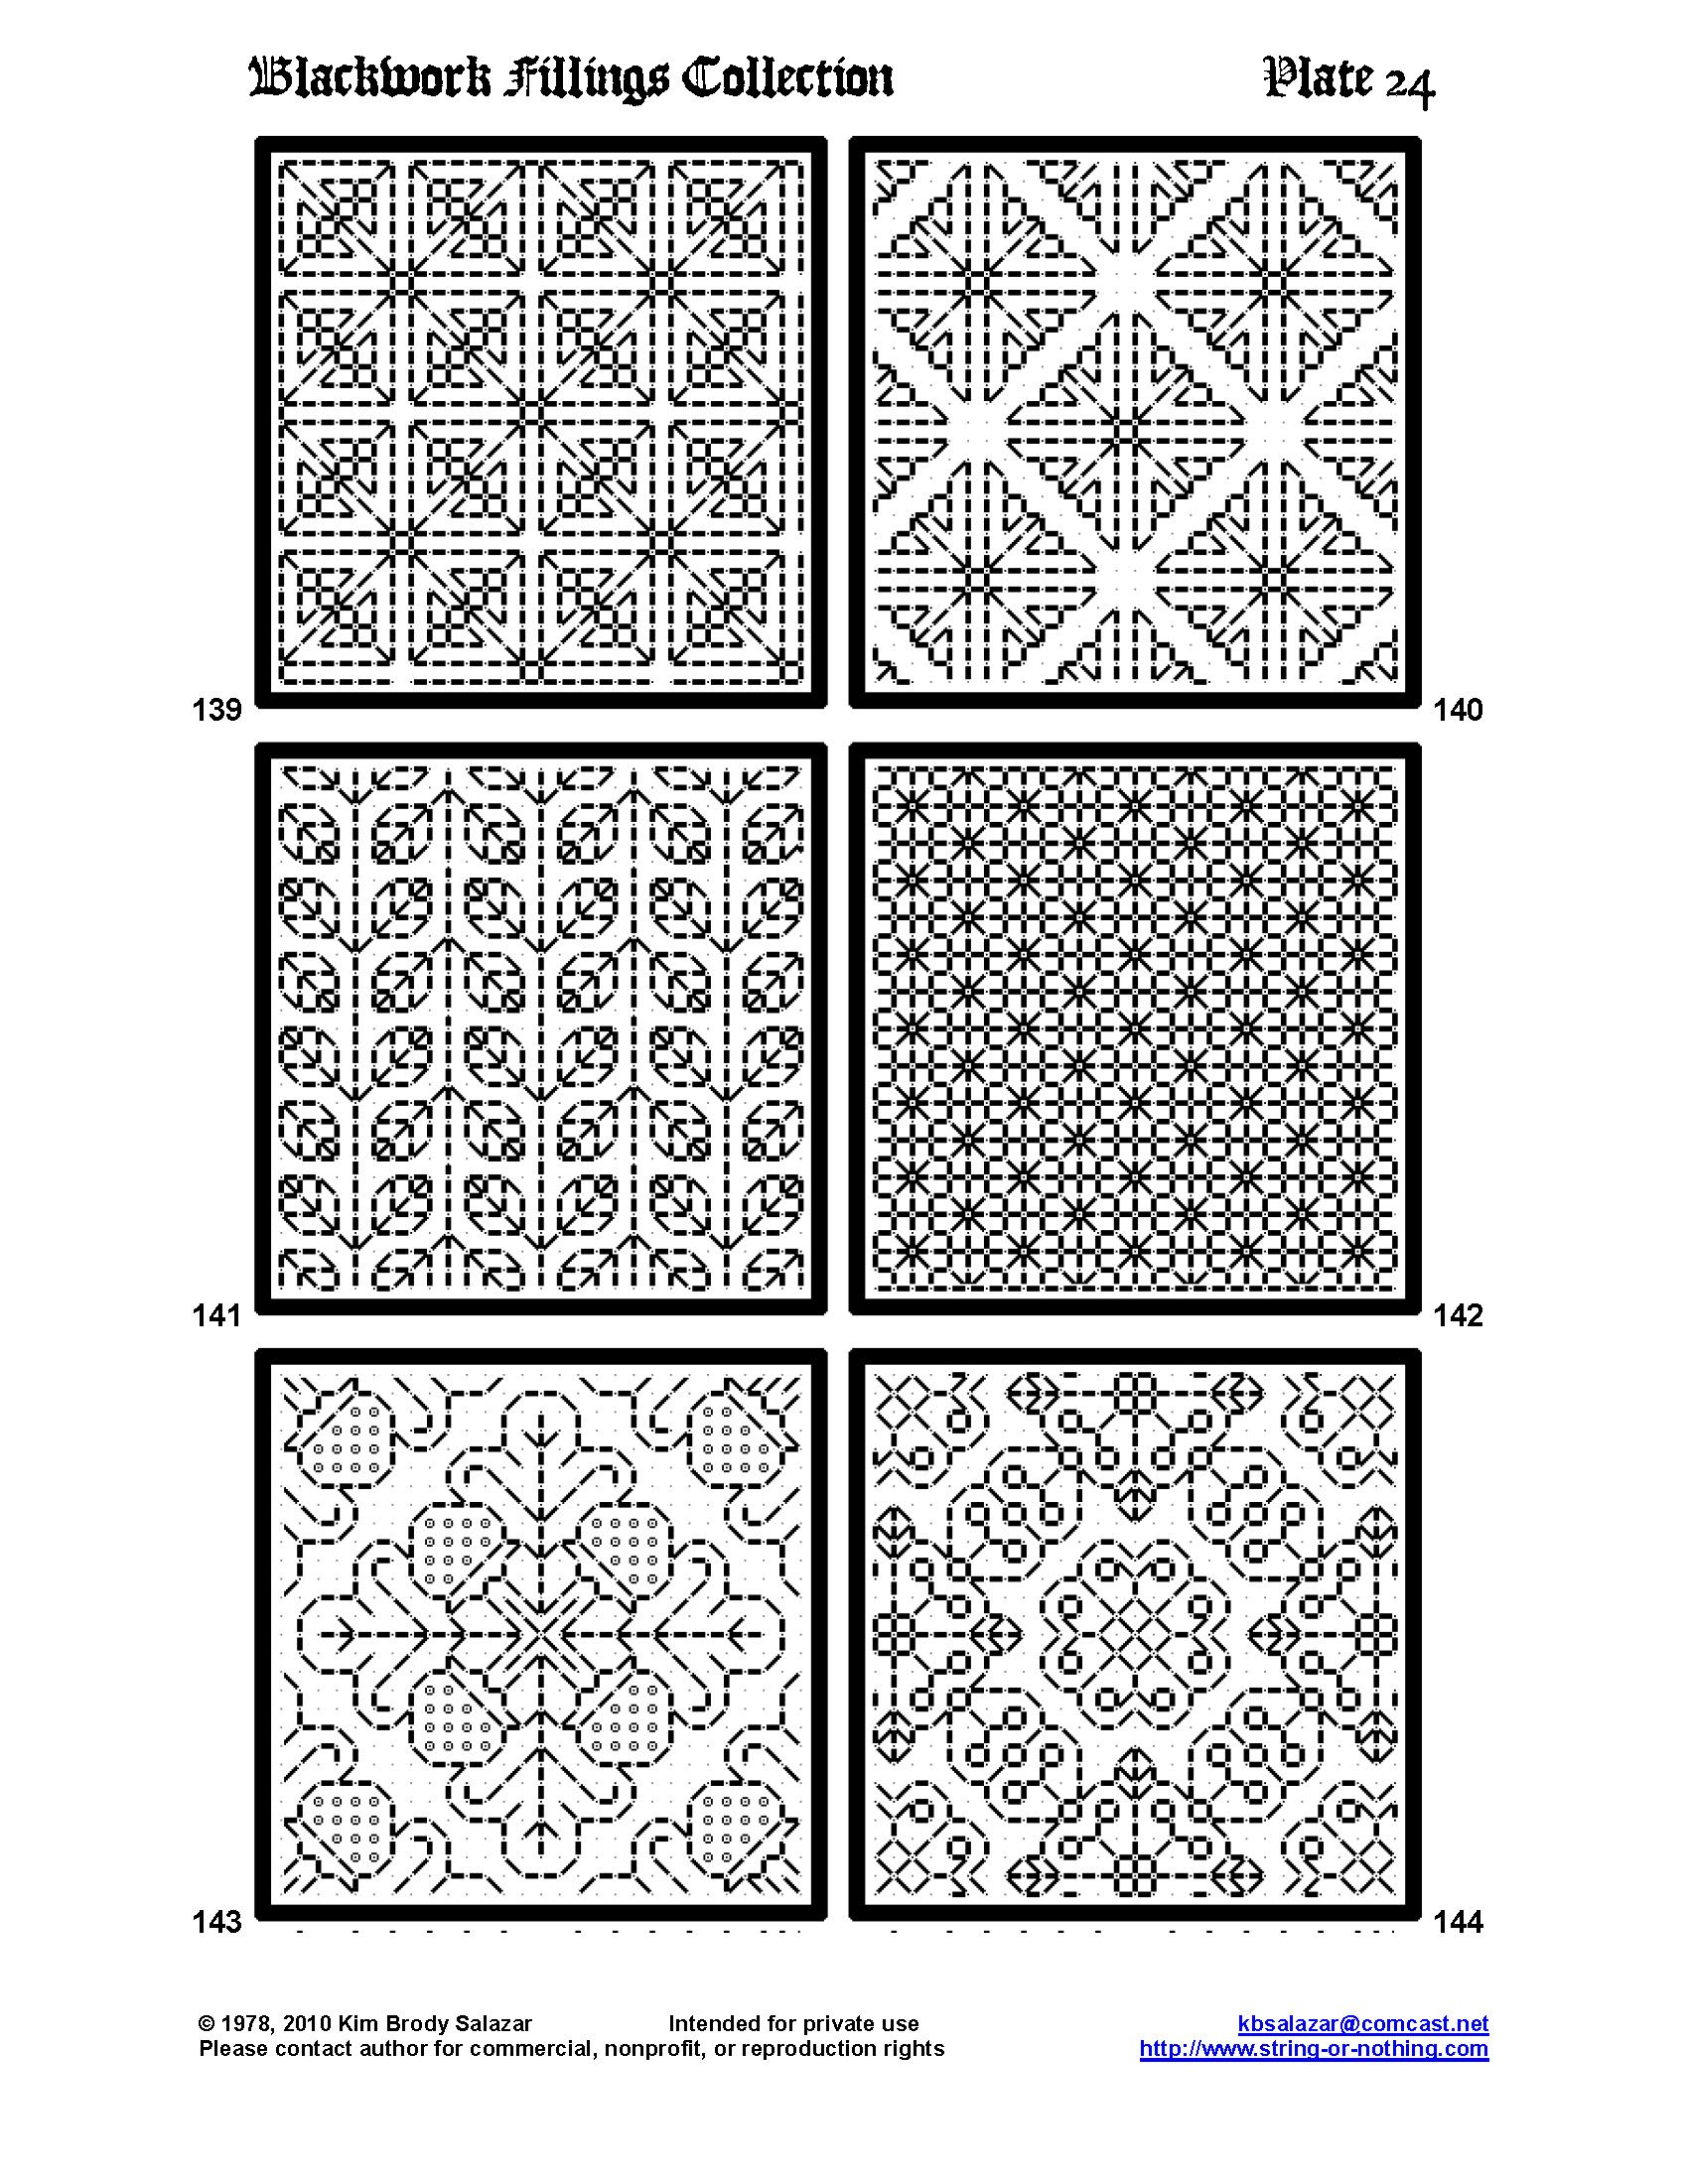 Blackwork Embroidery Patterns Af187 Photo From Album Ensamplario Atlantio Being A Collection Of